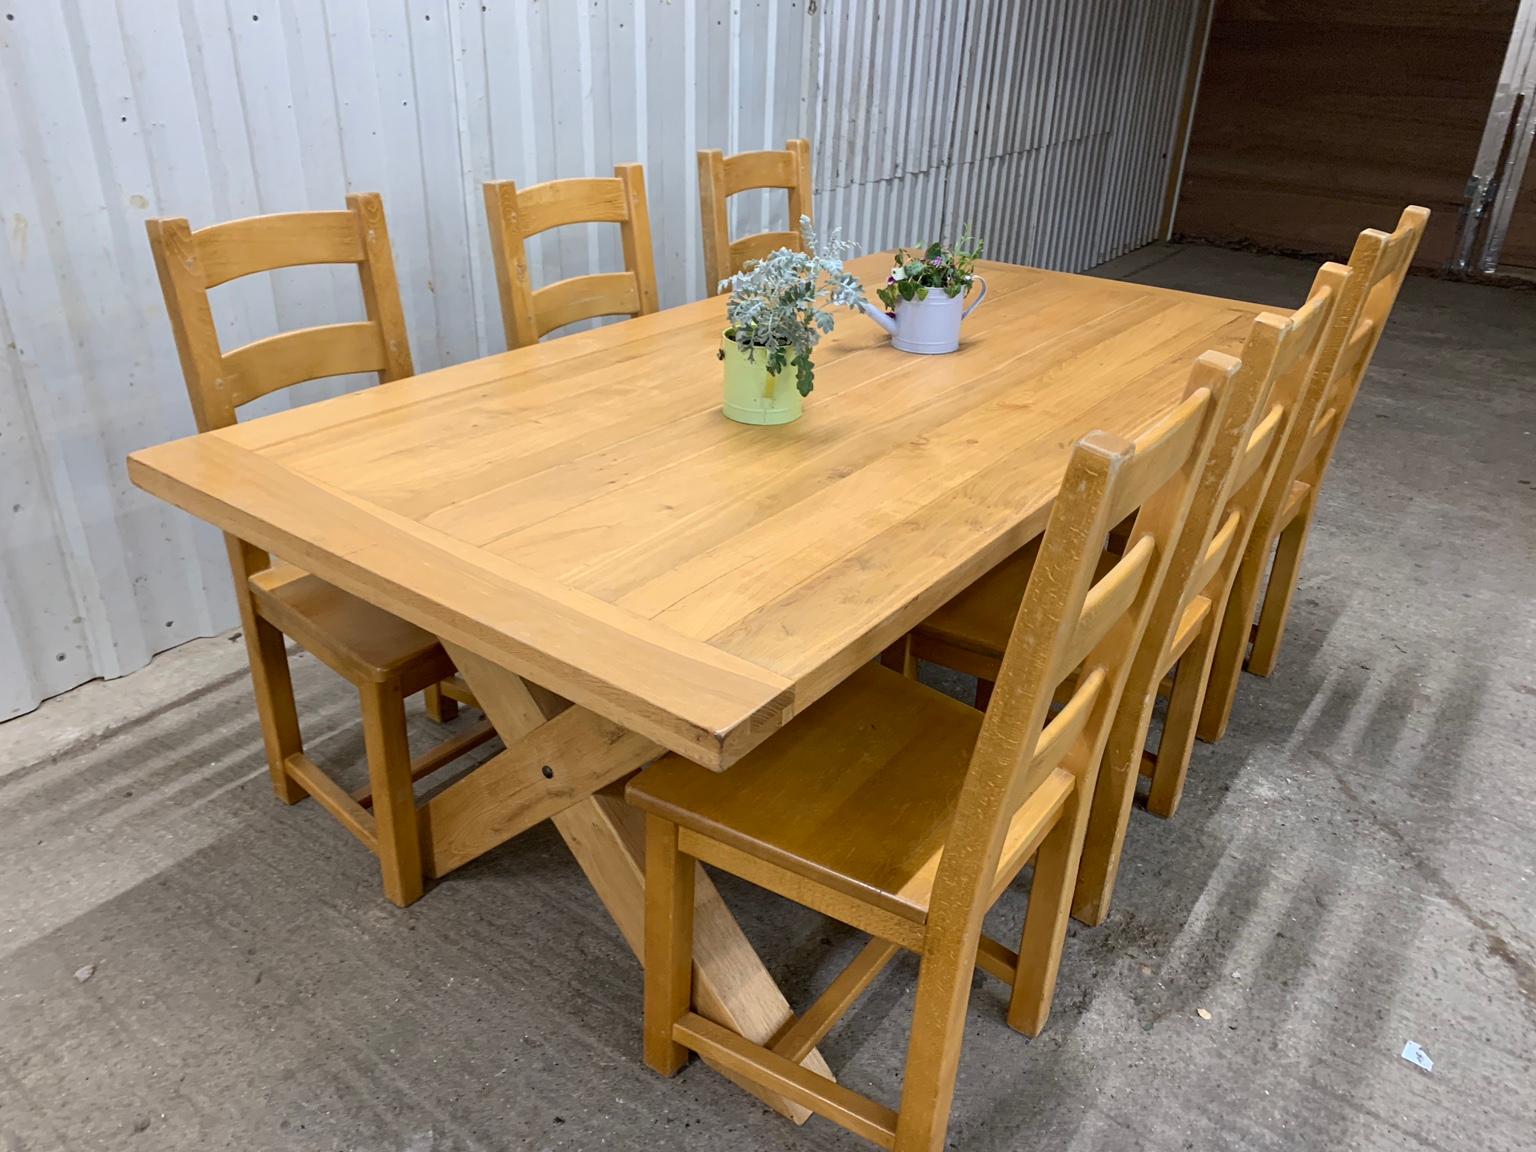 7ft Solid Oak Dining Table And 6 Chairs In Ox9 Oxfordshire For